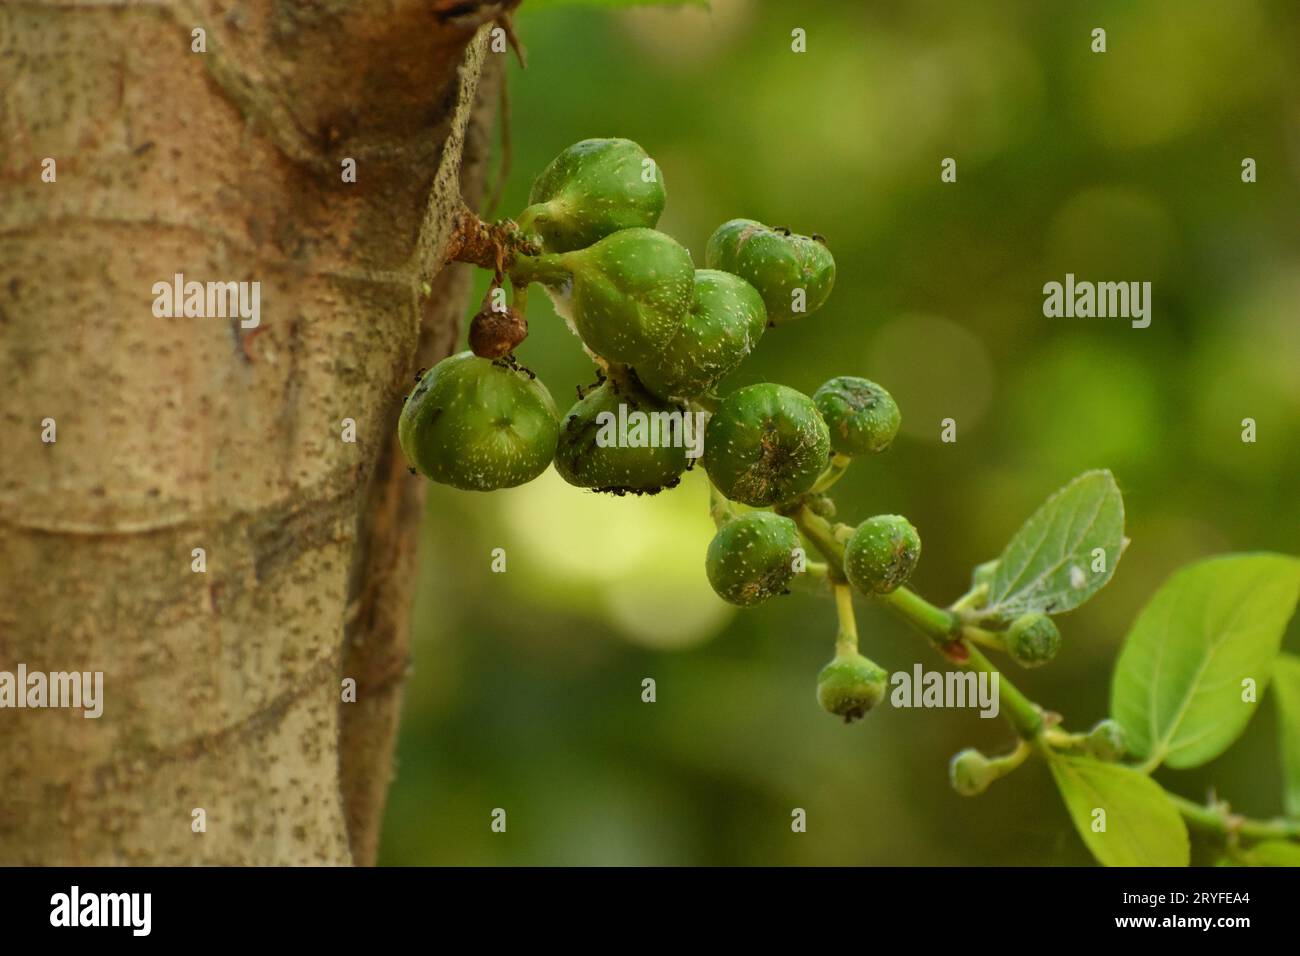 Close up photo of ficus fruits with blur background. Java, Indonesia. Stock Photo